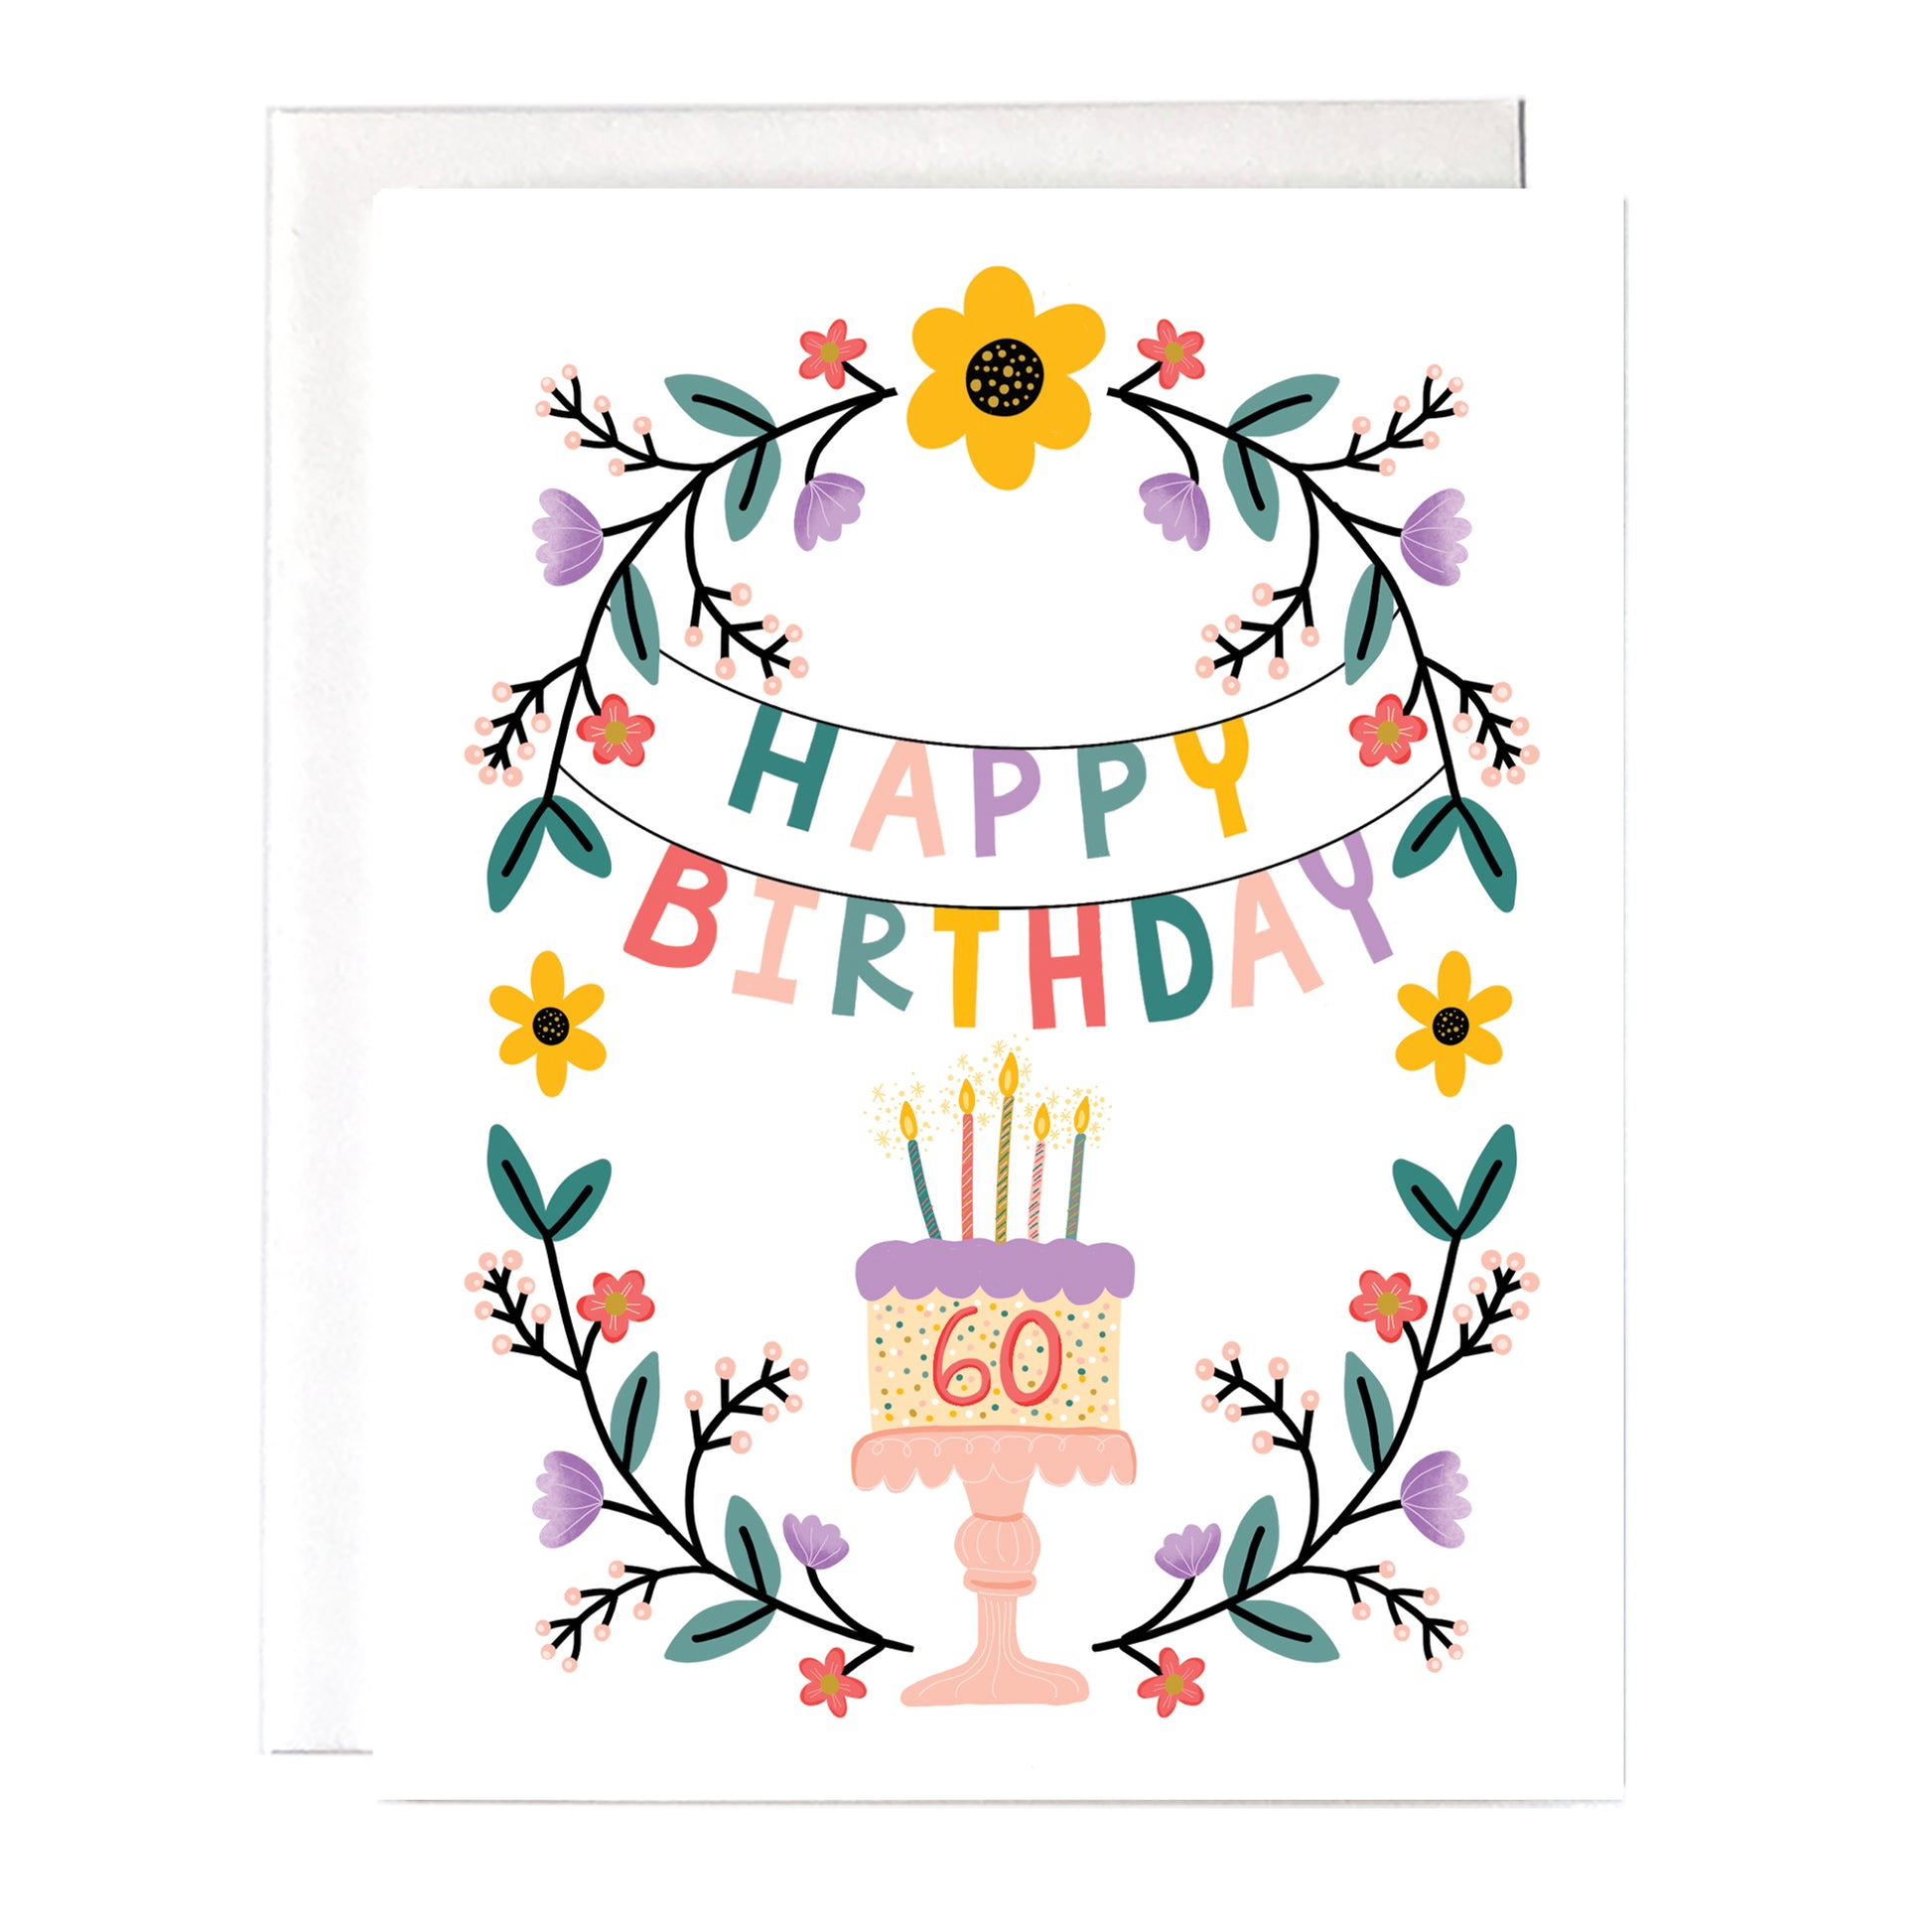 60th Birthday Card with beautiful floral design and birthday cake. Size A2 greeting card (4.25" x 5.5") with envelope, blank Inside. All cards are designed and Illustrated with love by me, Anna Fox, and are printed at my friendly neighborhood print shop in Denver, CO.